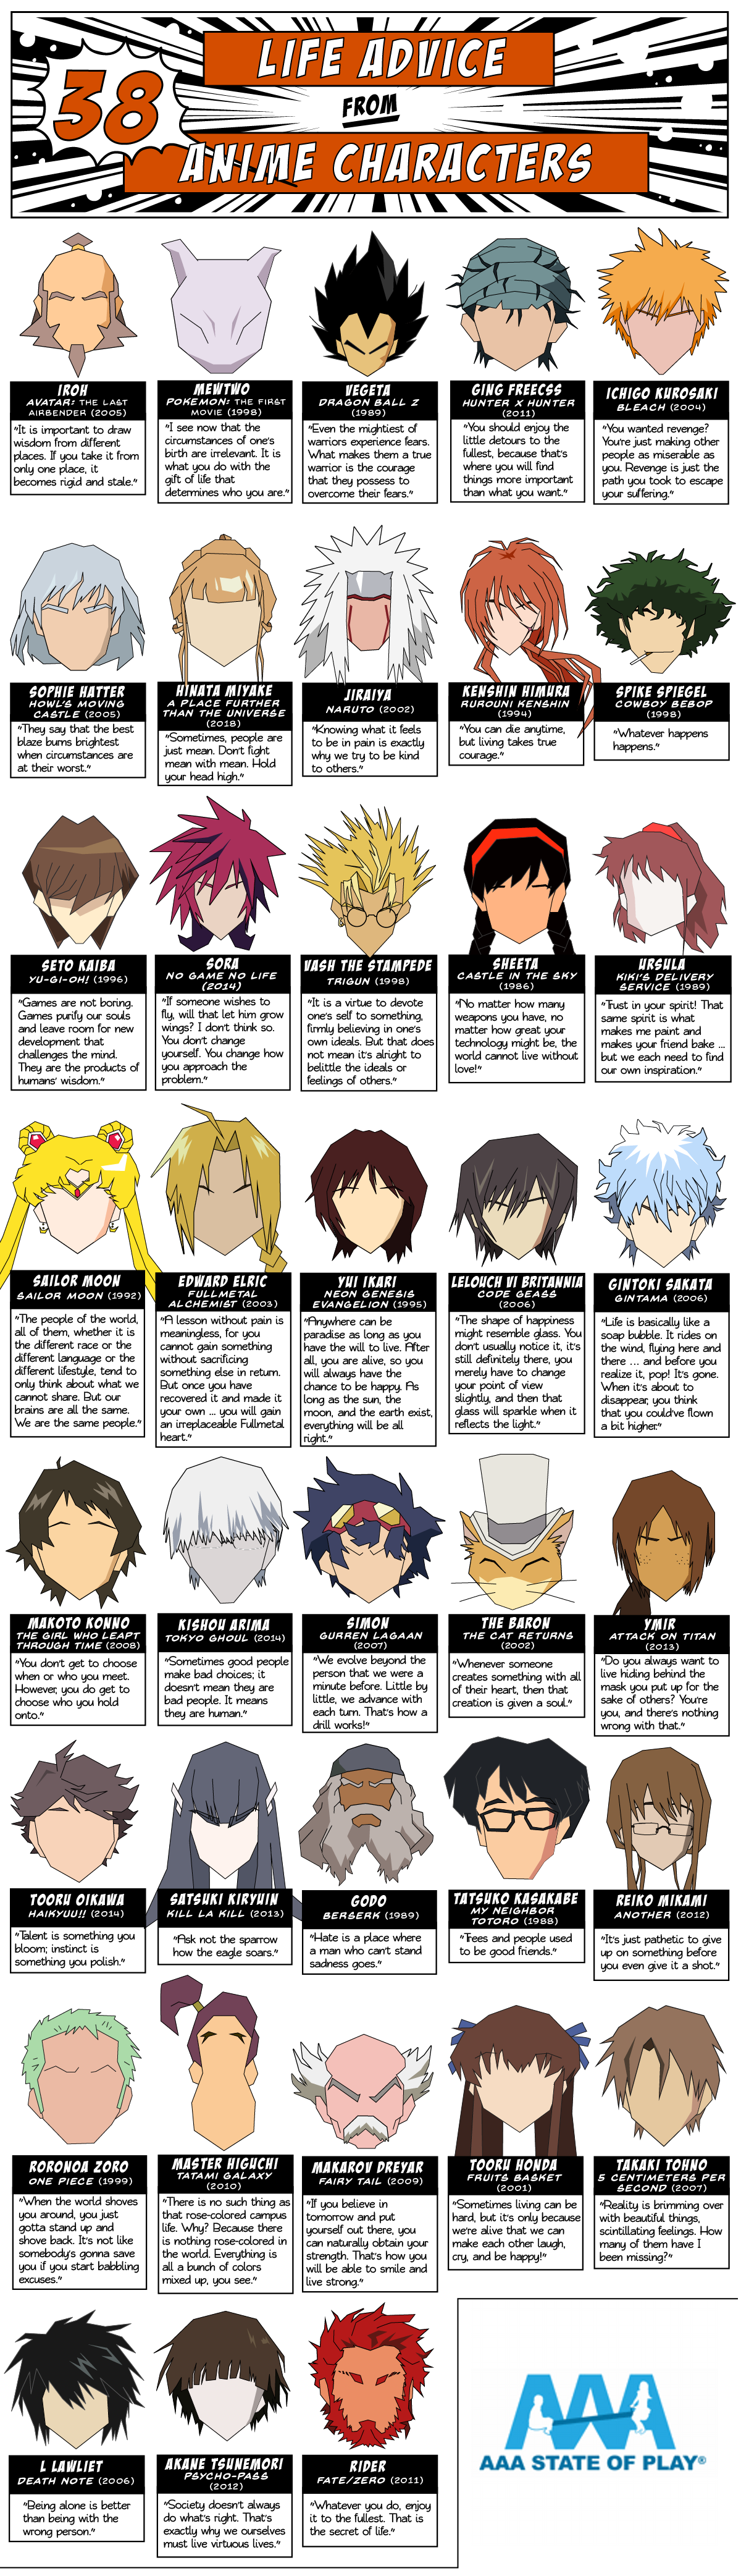 Life Advice from 38 Anime Characters | AAA State of Play